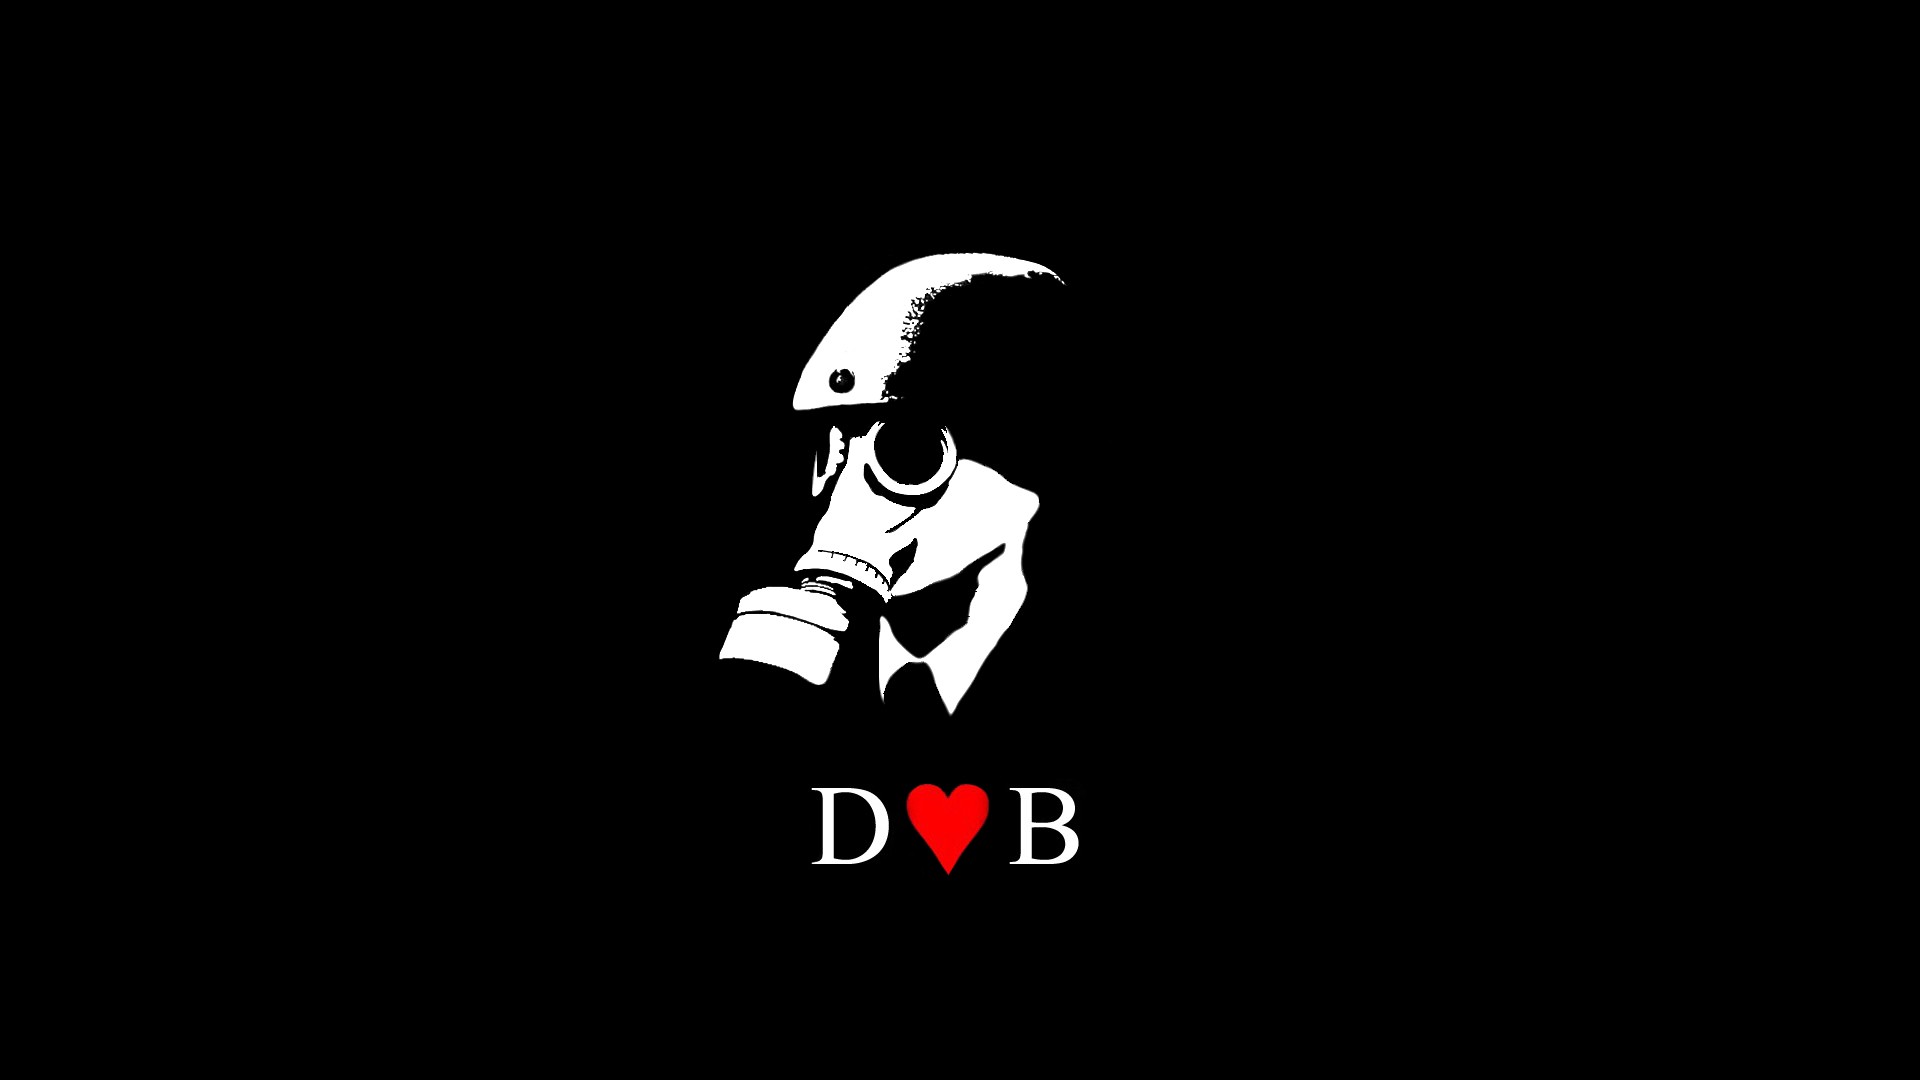 Wallpaper Dnb Drum And Bass Black Background